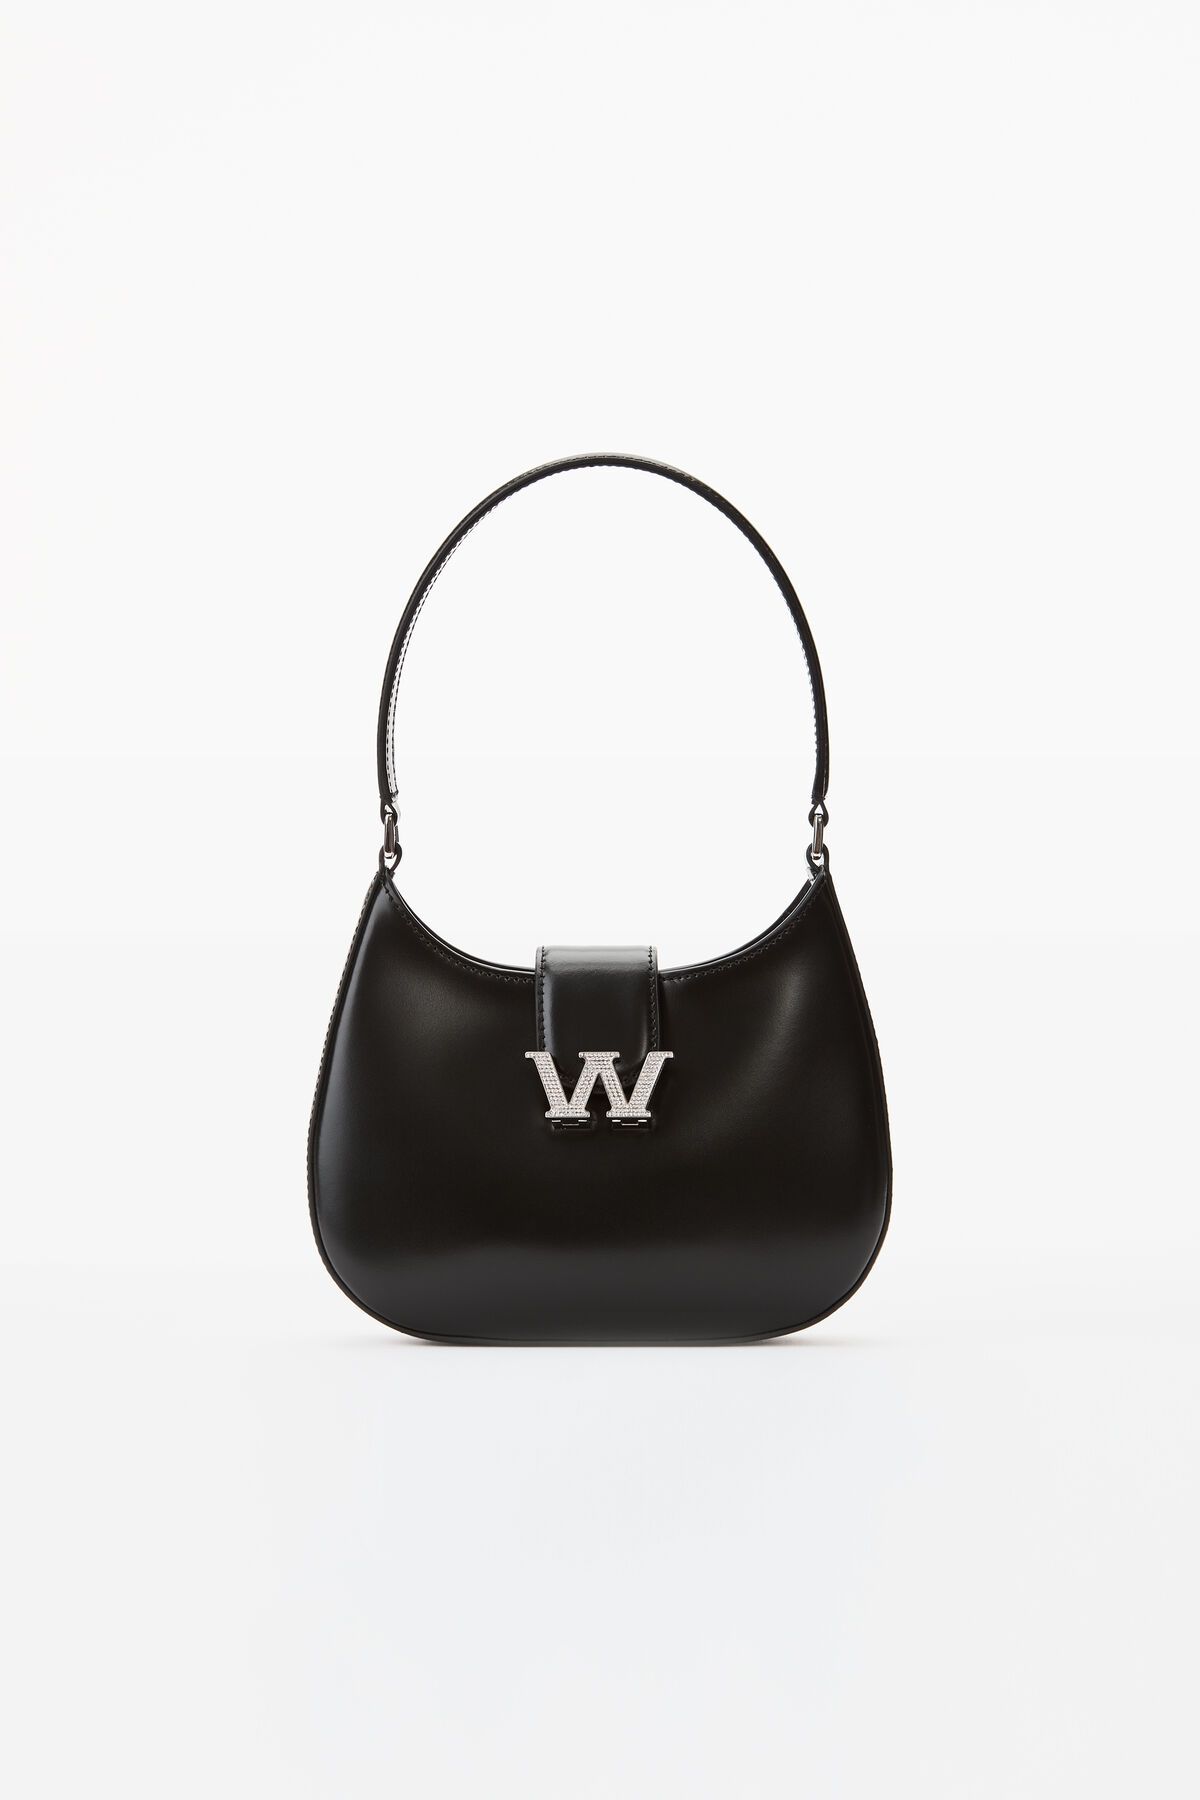 W LEGACY SMALL HOBO IN LEATHER | Alexander Wang